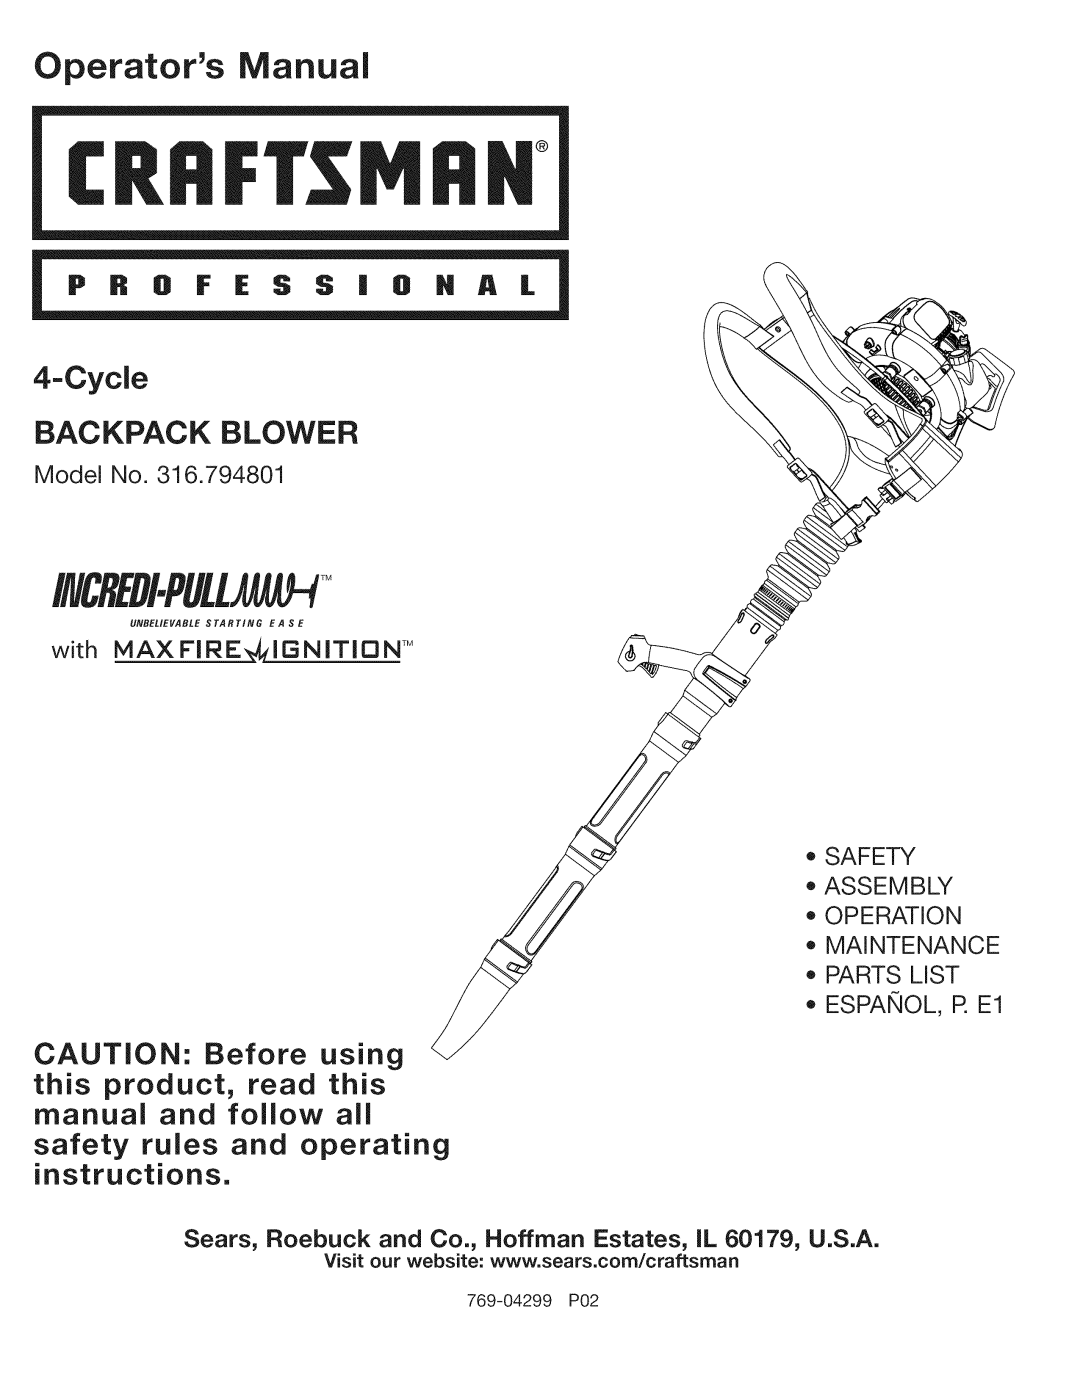 Craftsman 316.794801 manual Operators Manual, Cycle, Backpack Blower, safety rules and operating, instructions 